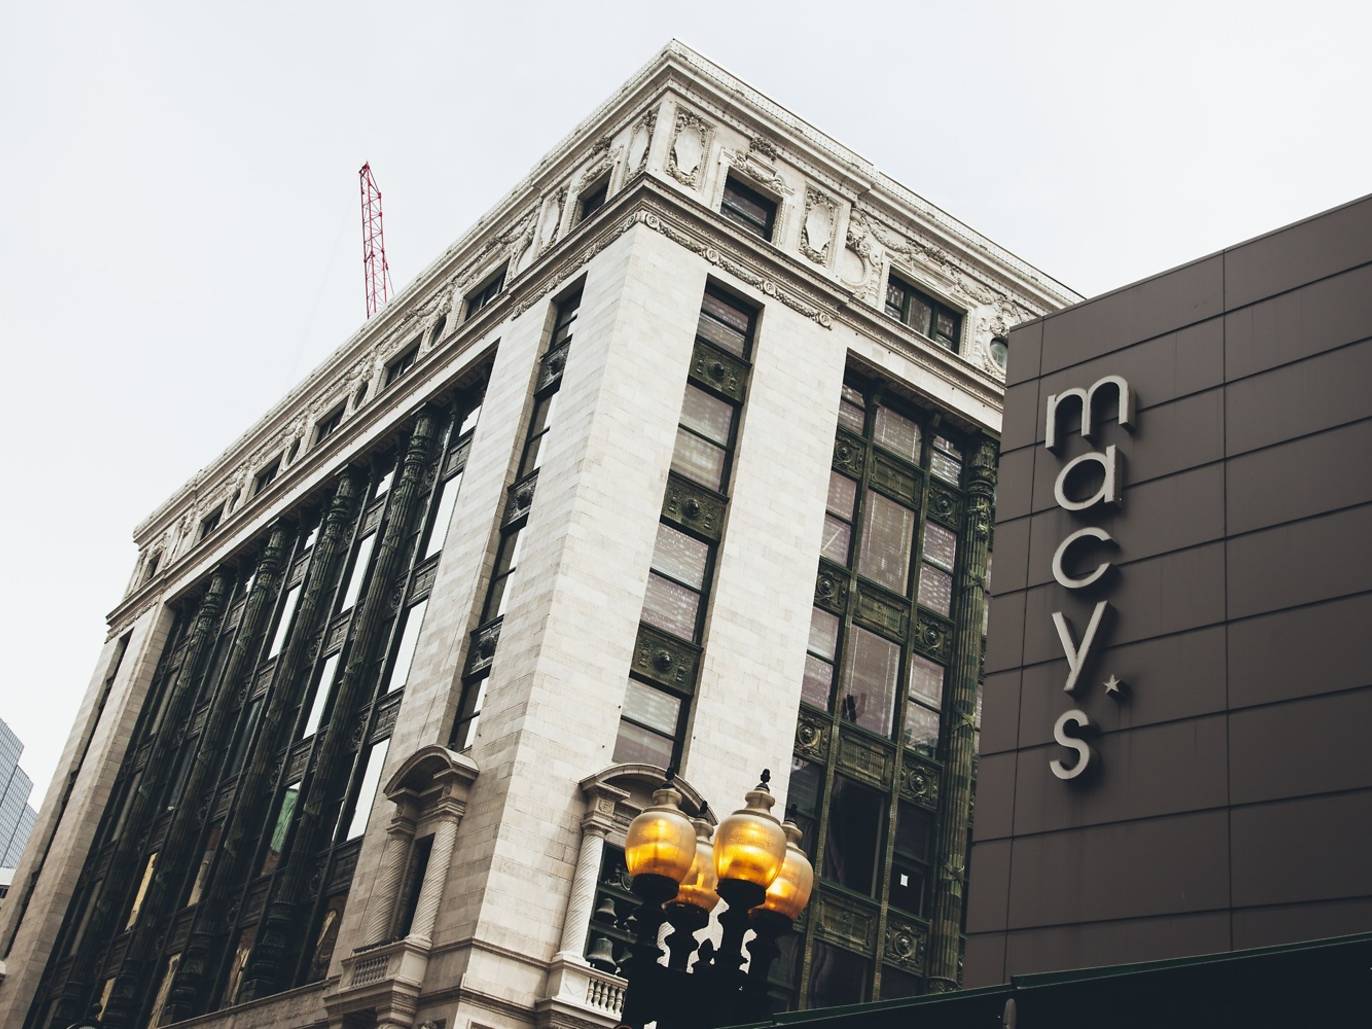 Department stores for men's and women's fashion in Boston